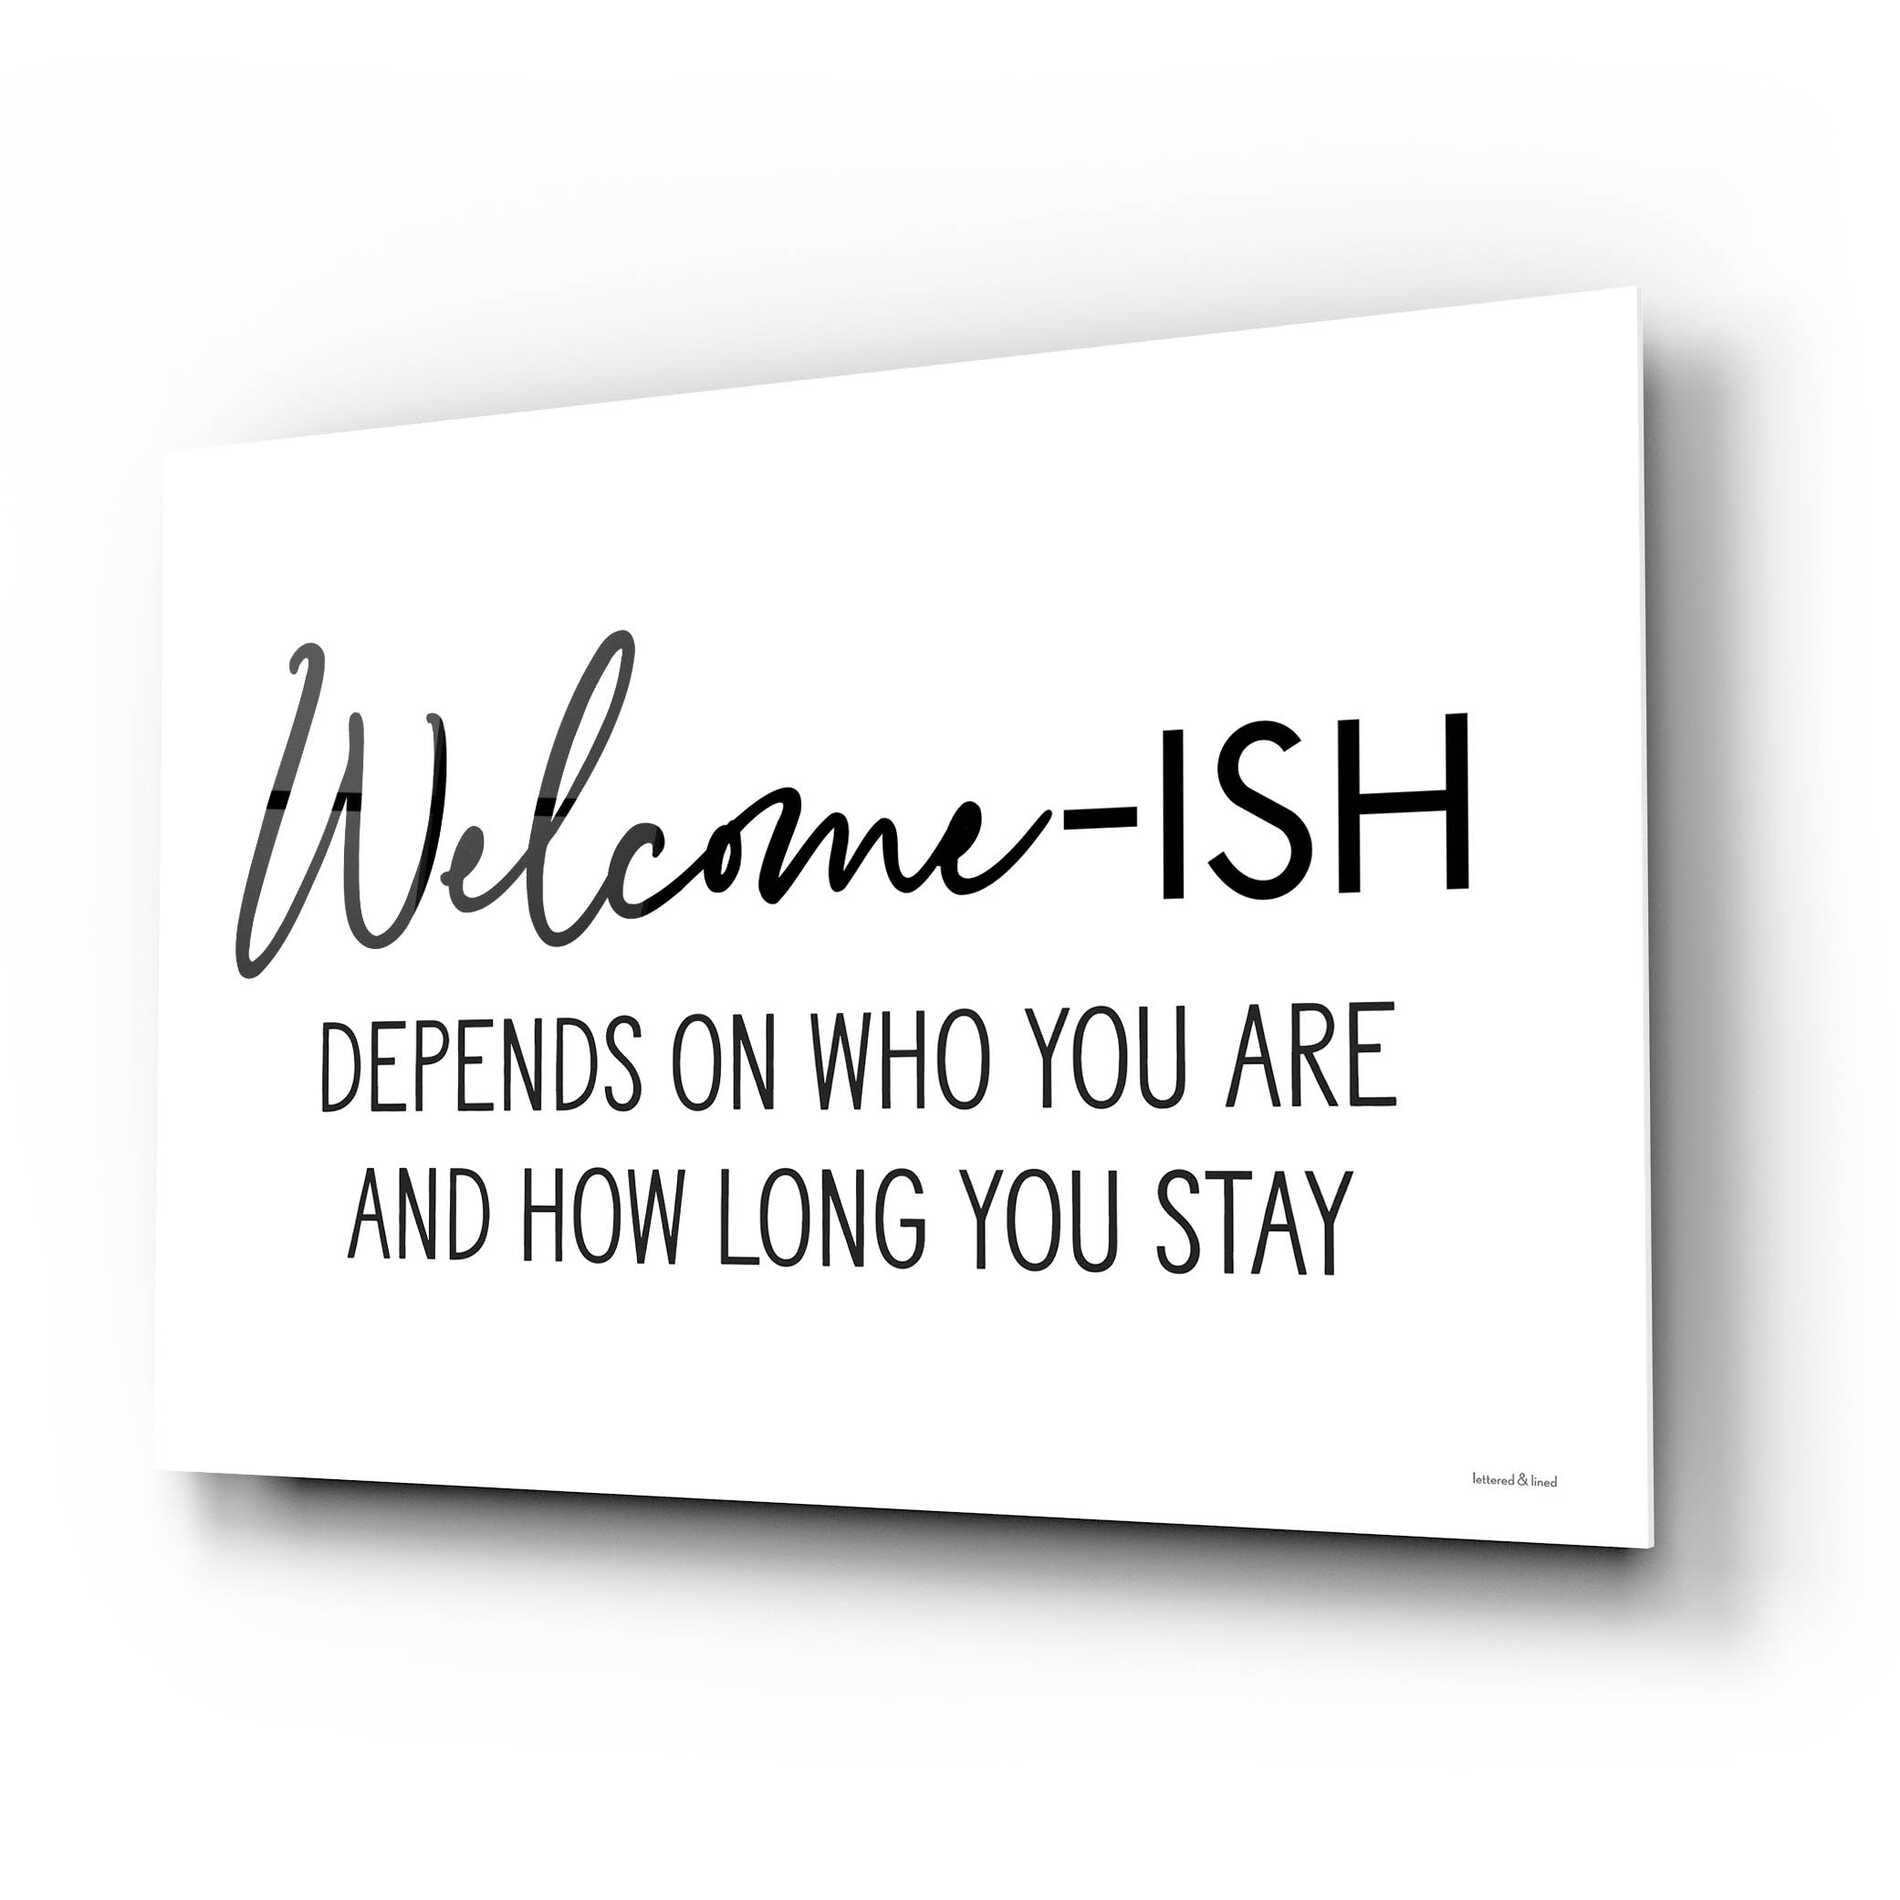 Epic Art 'Welcome-ish' by lettered & lined, Acrylic Glass Wall Art,24x16